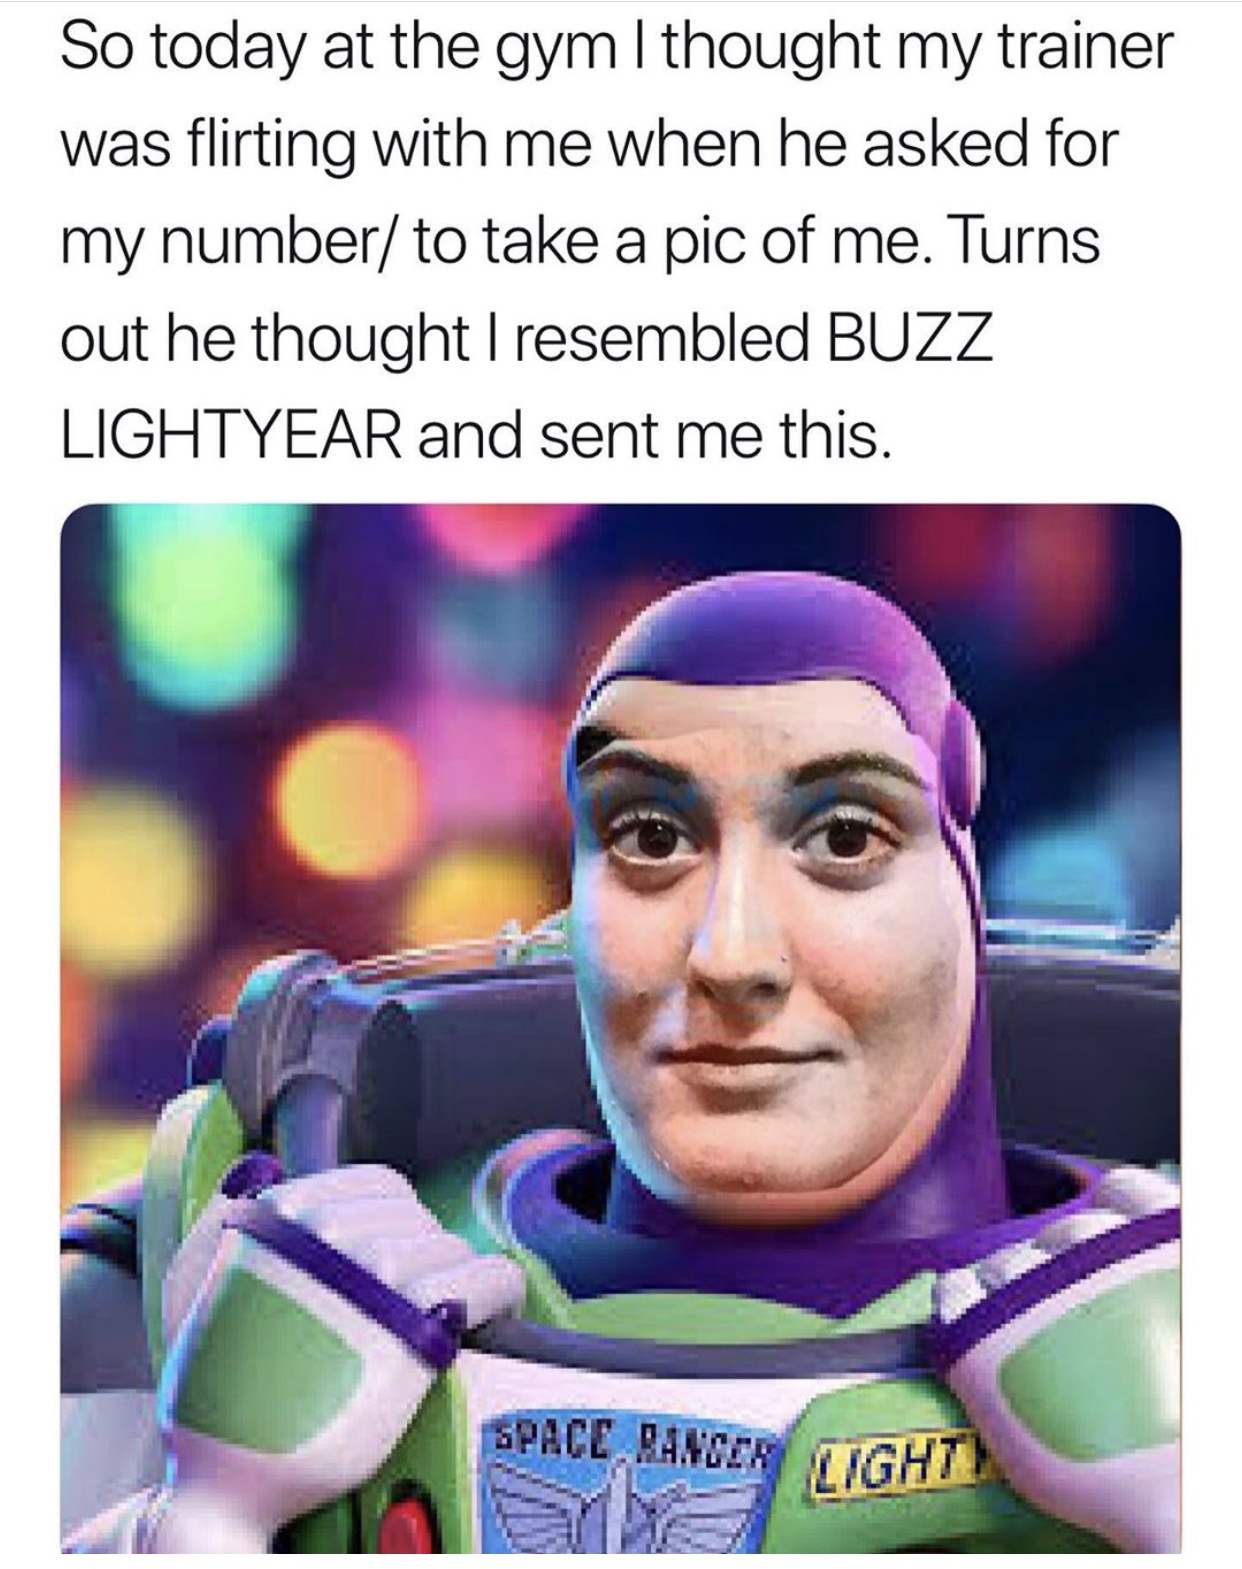 emily baumgartner buzz lightyear - So today at the gym I thought my trainer was flirting with me when he asked for my number to take a pic of me. Turns out he thought I resembled Buzz Lightyear and sent me this. Space Ranger be Light